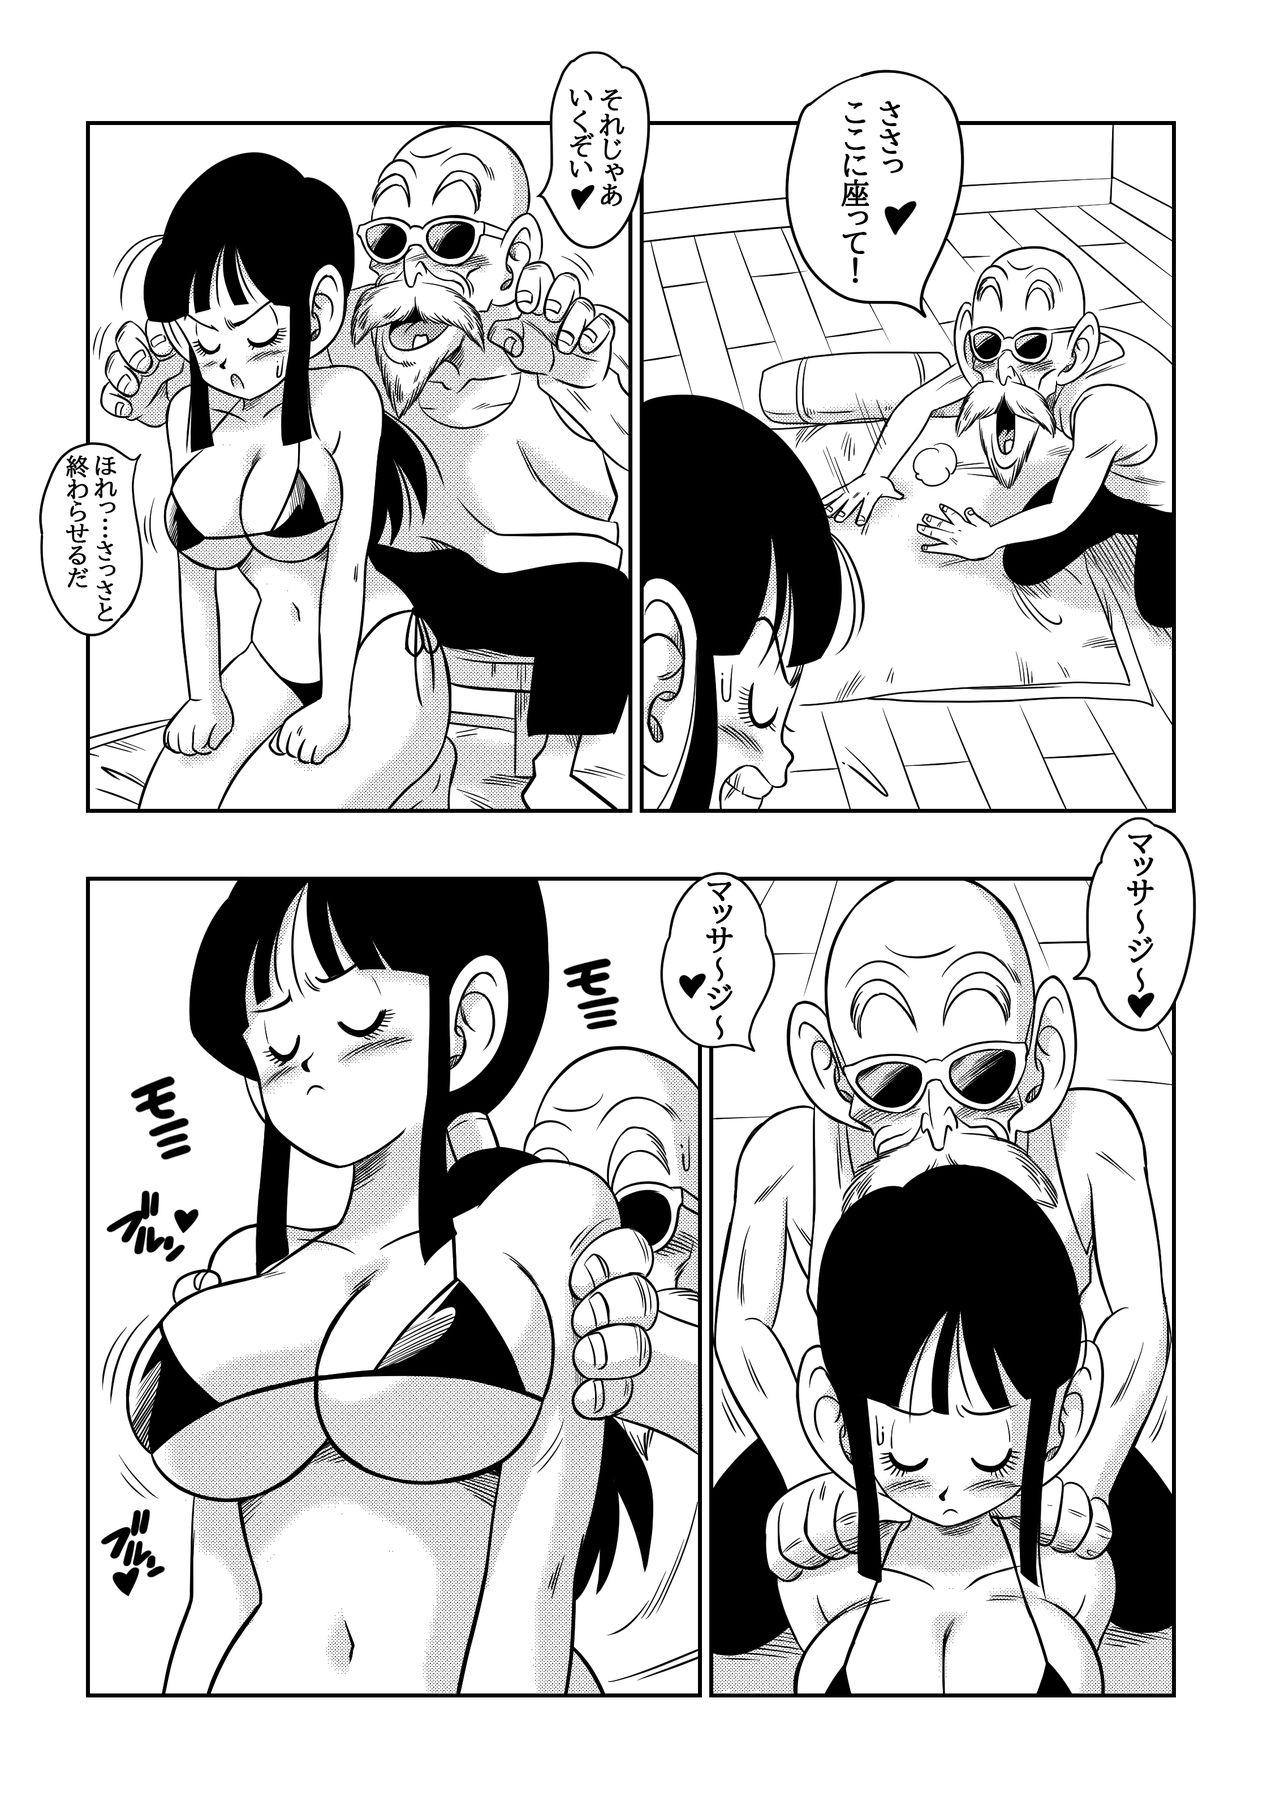 Best Blow Job "An Ancient Tradition" - Young Wife is Harassed! - Dragon ball z Ddf Porn - Page 8